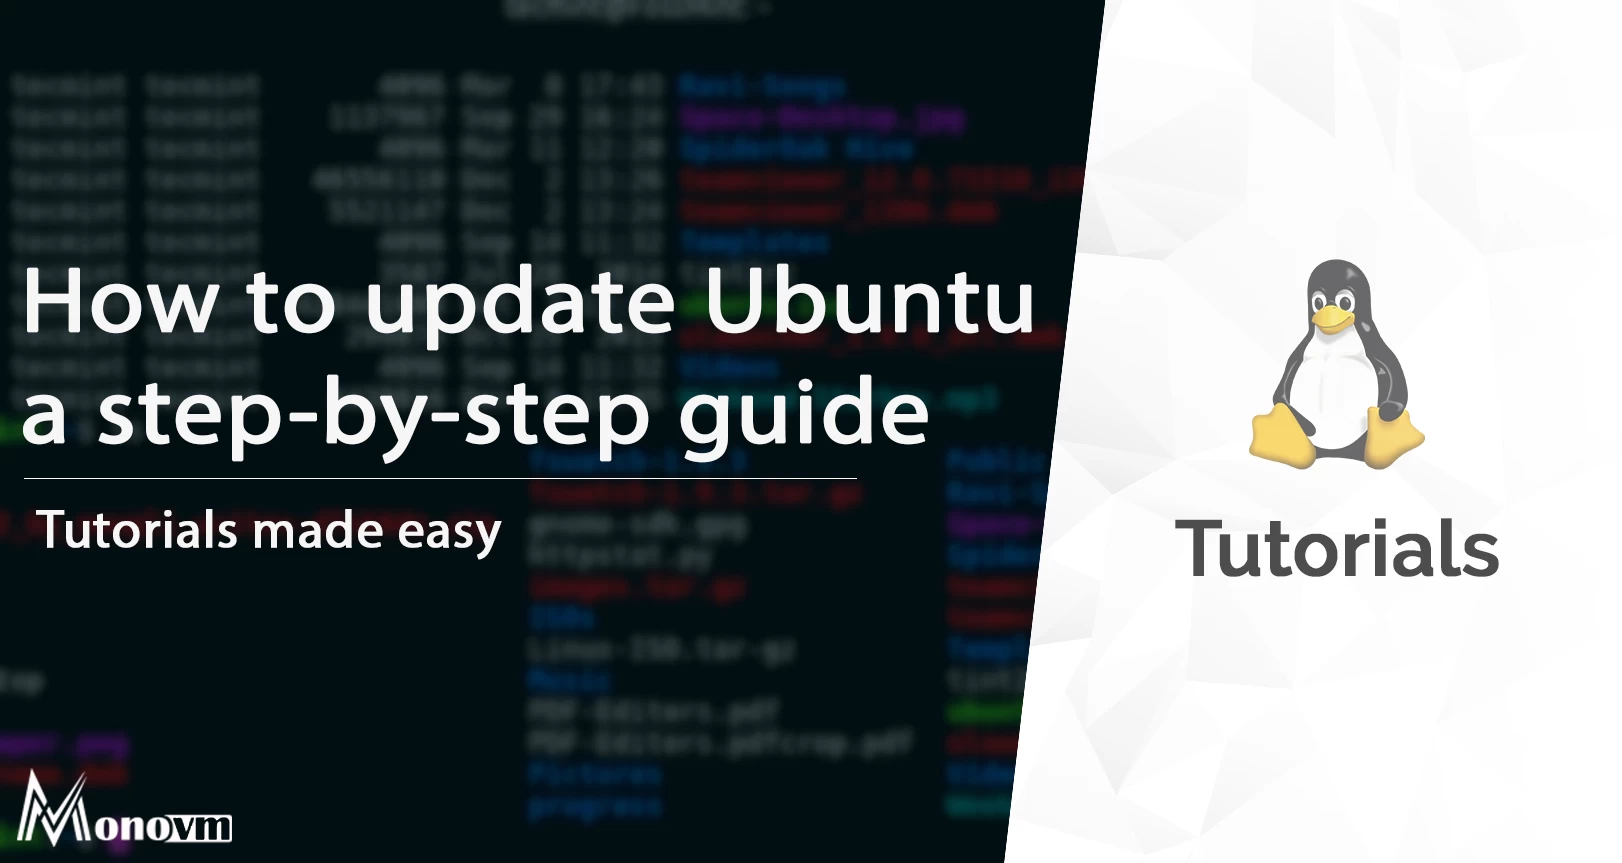 How to update Ubuntu; a step-by-step guide